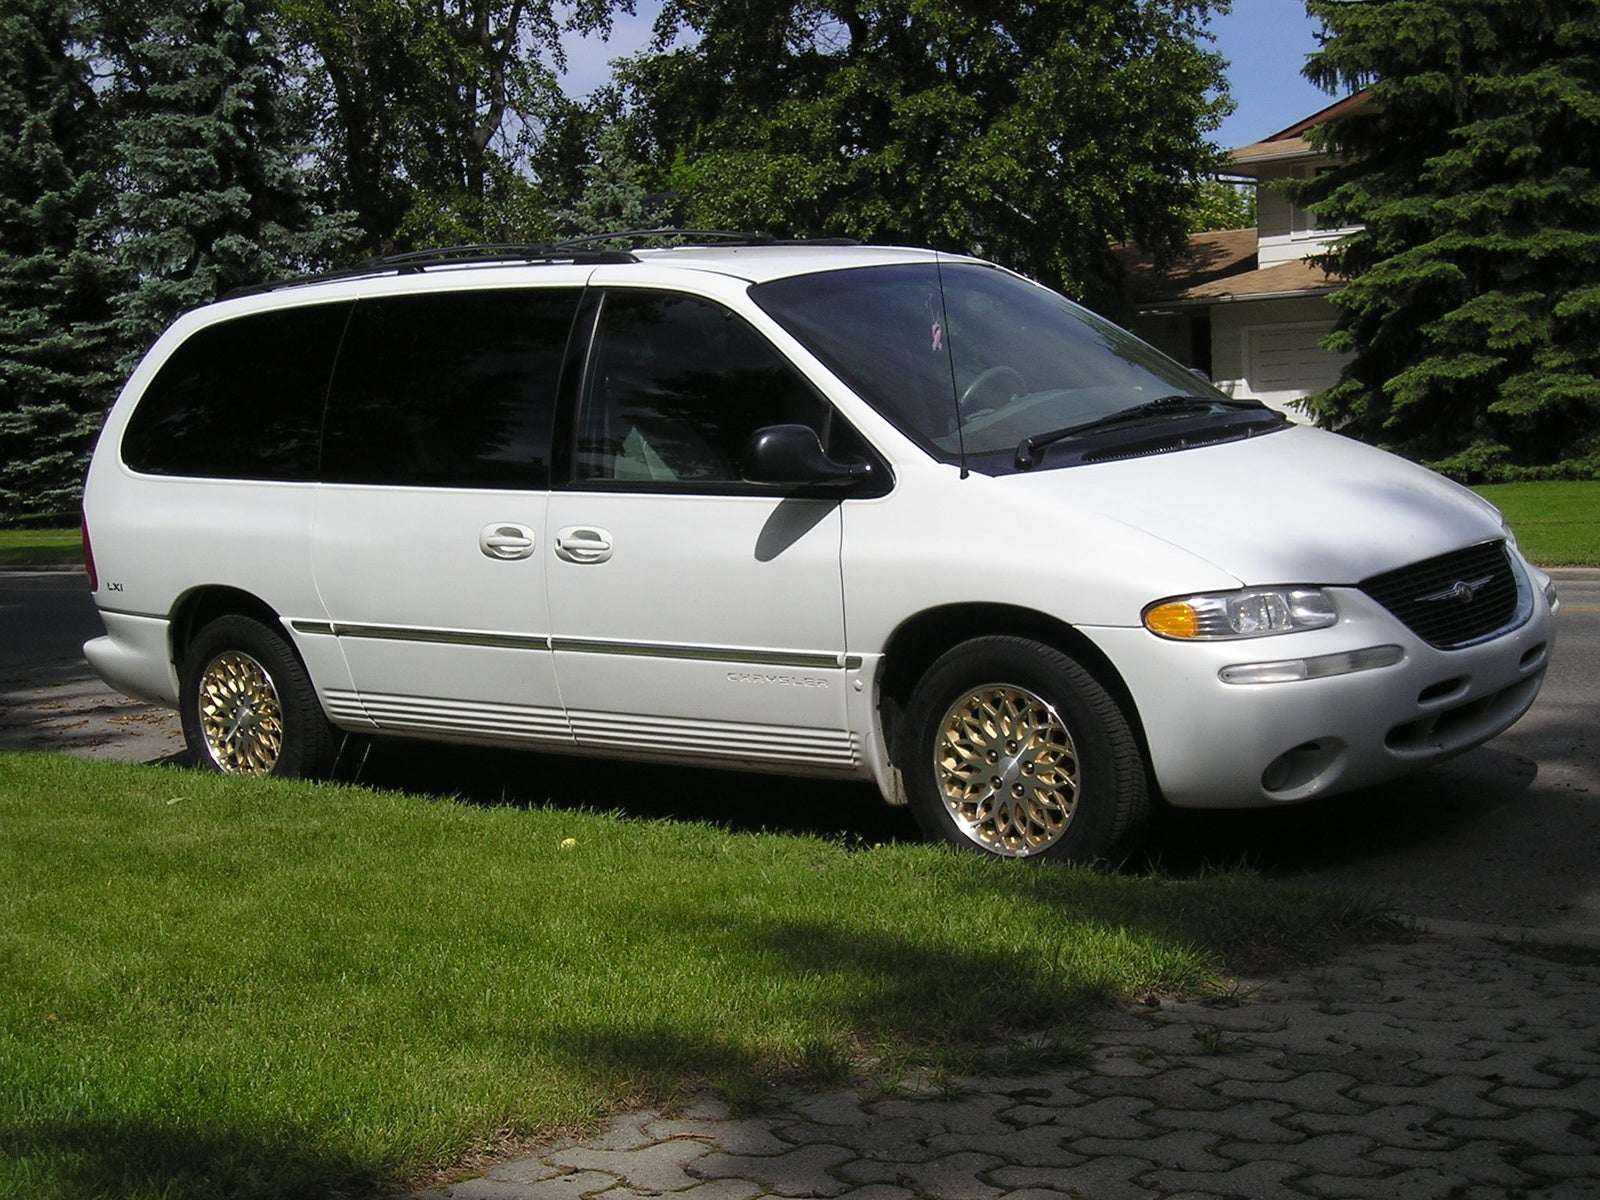 2002 Chrysler town and country consumer reviews